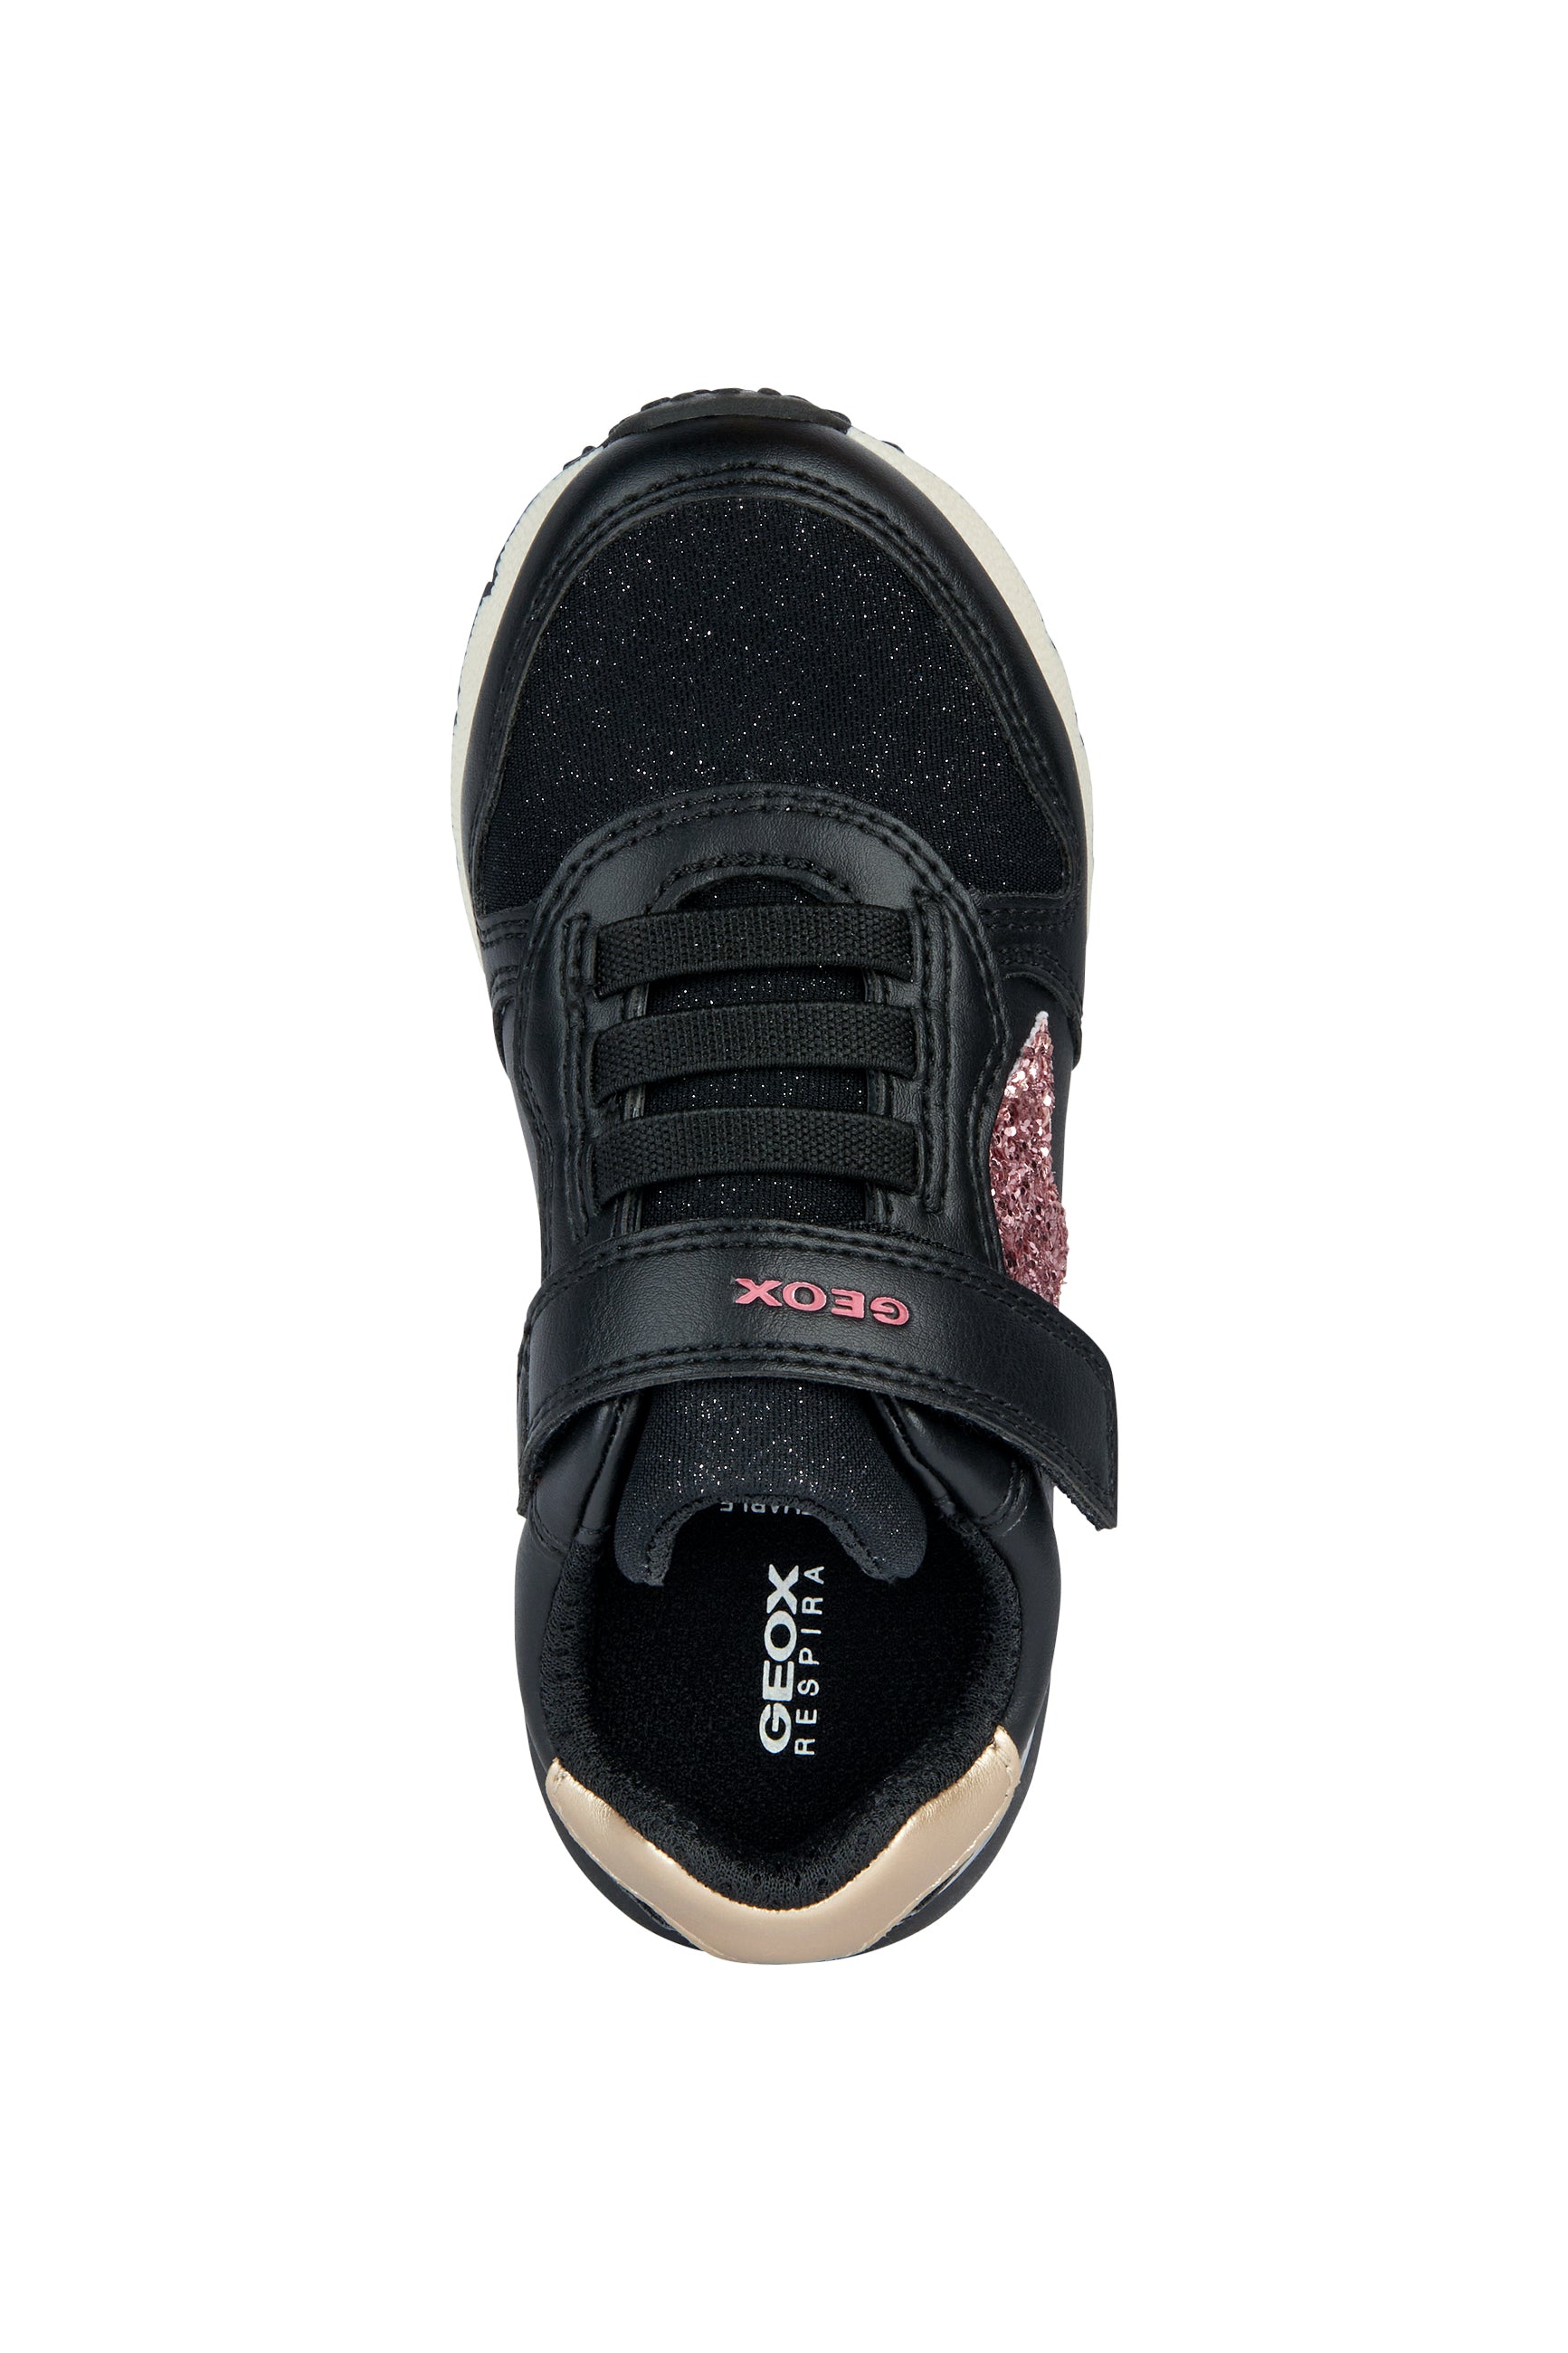 A girls casual trainer by Geox, style J Fasics Girl, in Black and Pink Glitter with elastic laces and single velcro fastening. Above view.